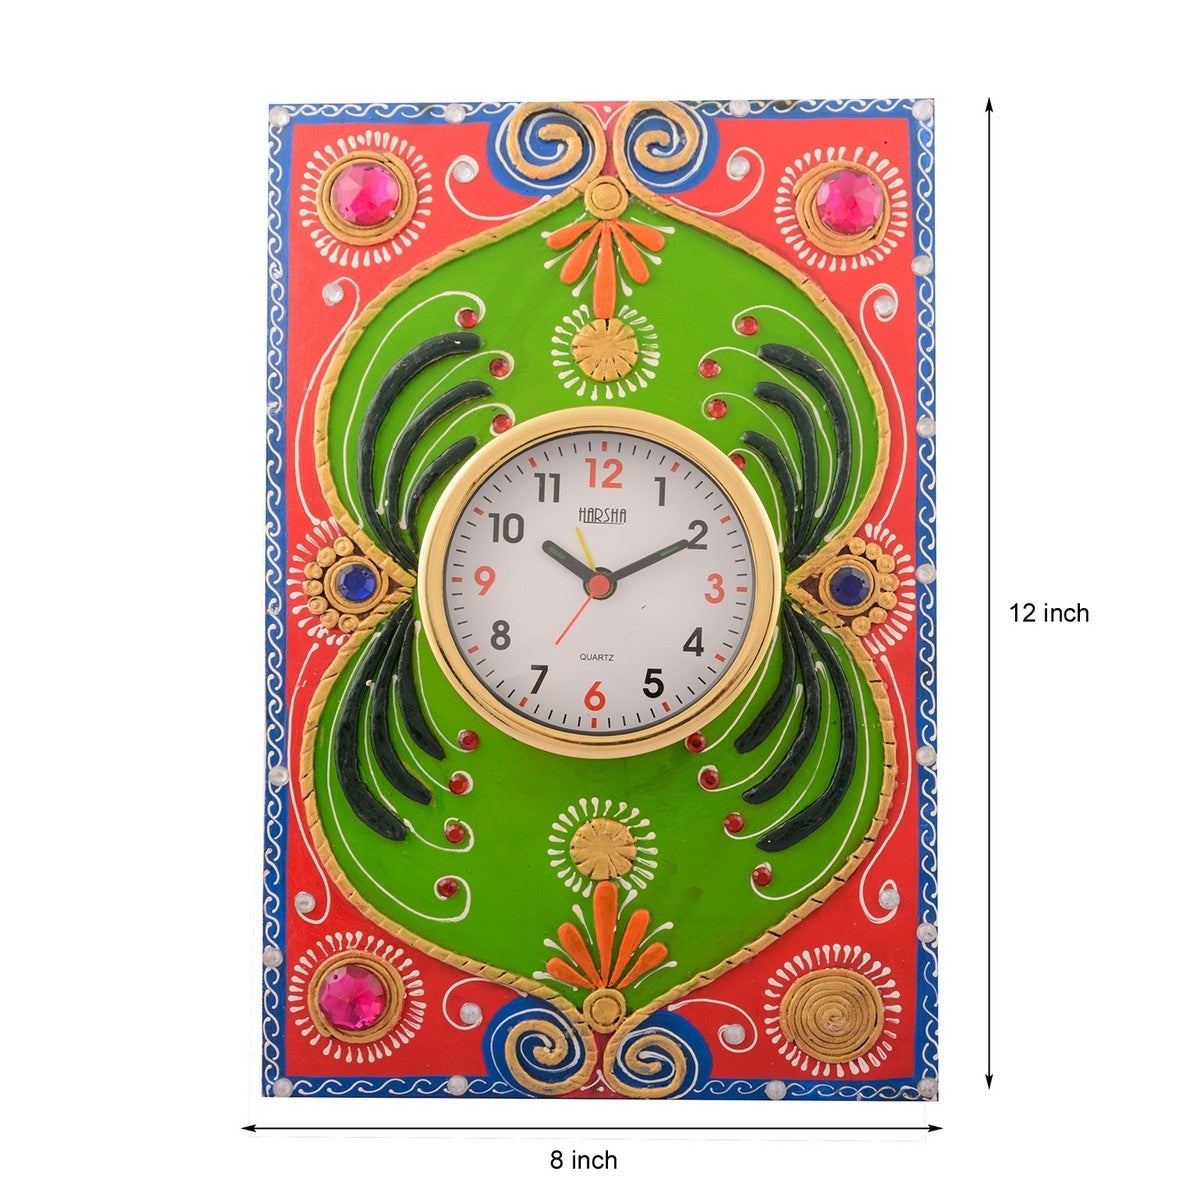 Wooden Papier Mache Embossed Artistic Handcrafted Wall Clock 2